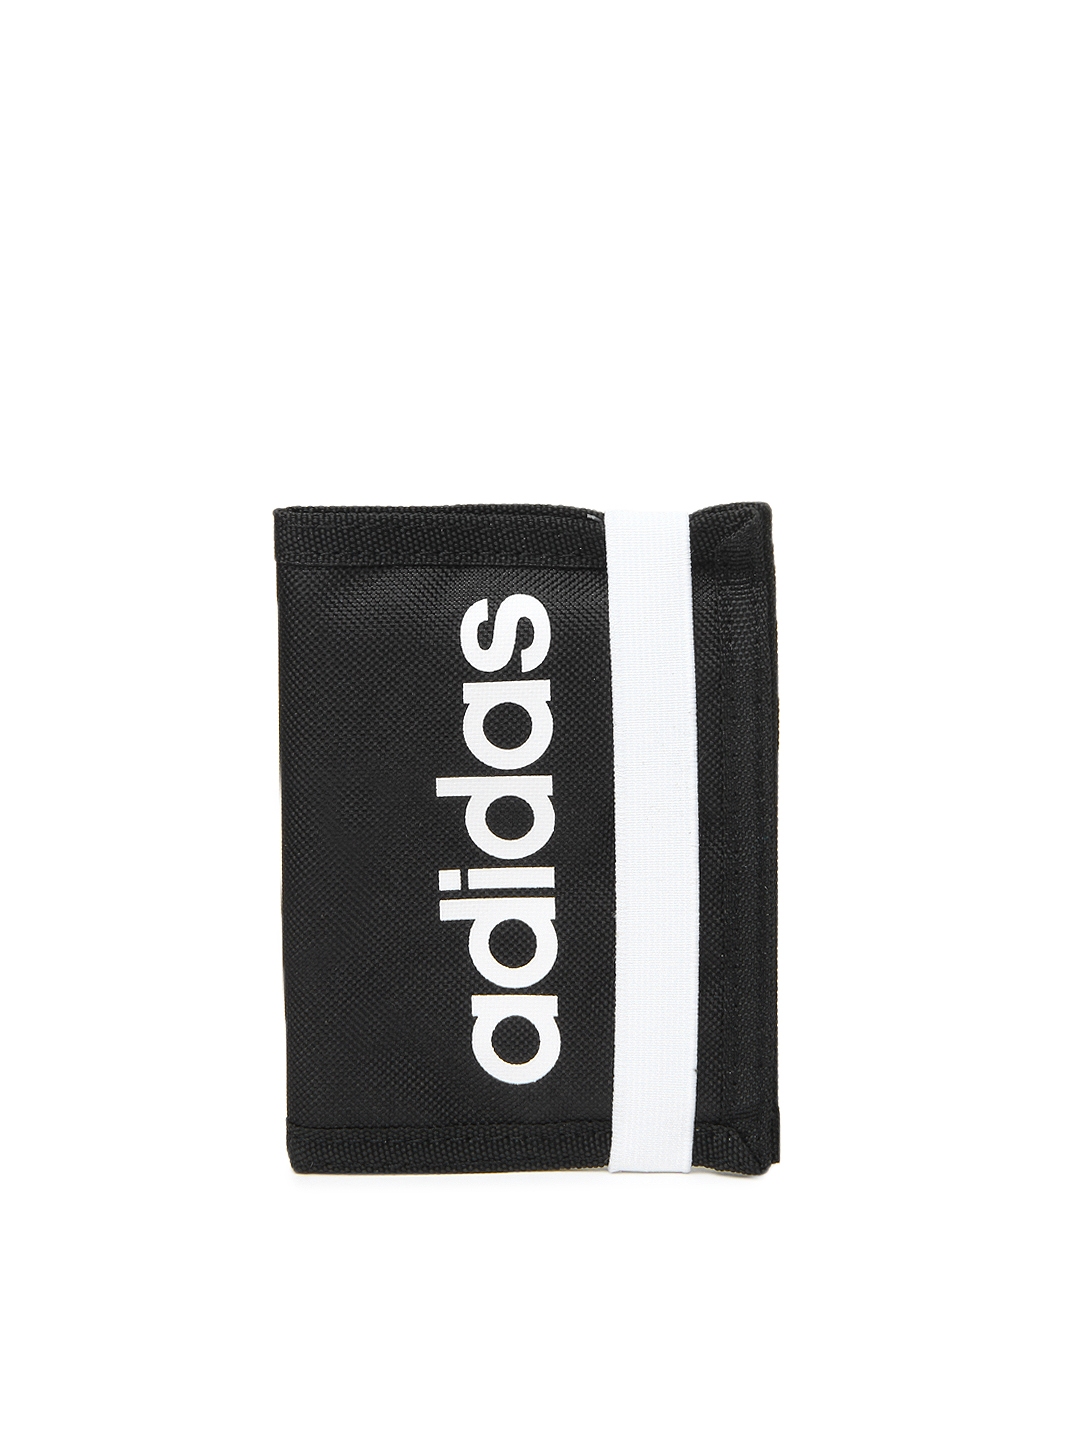 Buy ADIDAS WoUnisex Black Wallet - Wallets for Unisex 364186 | Myntra